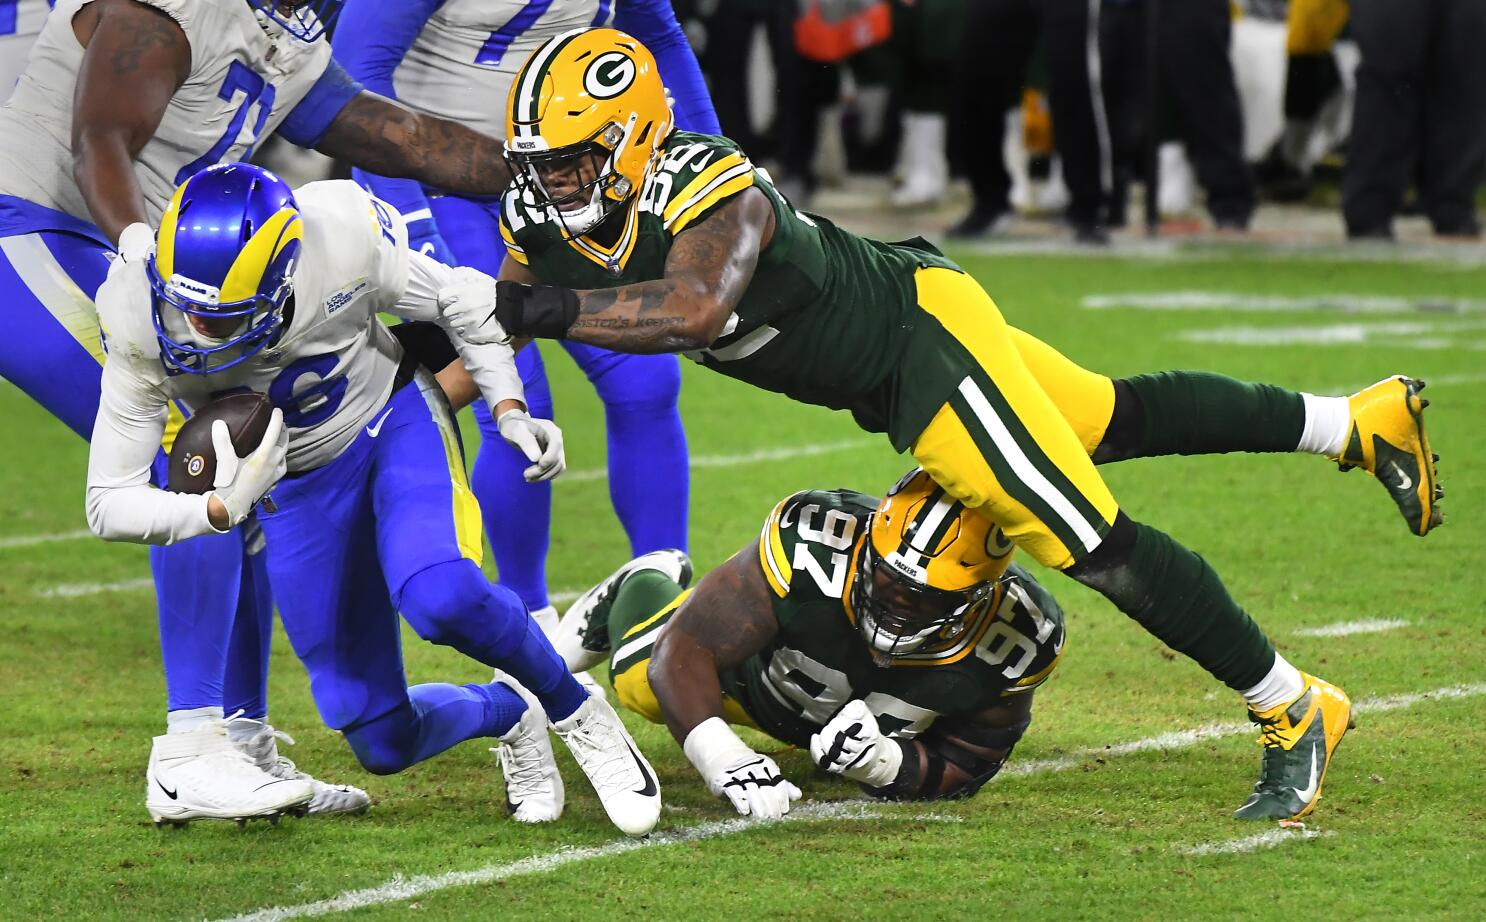 AJ Dillon gives emotional response on what it means to play for Packers